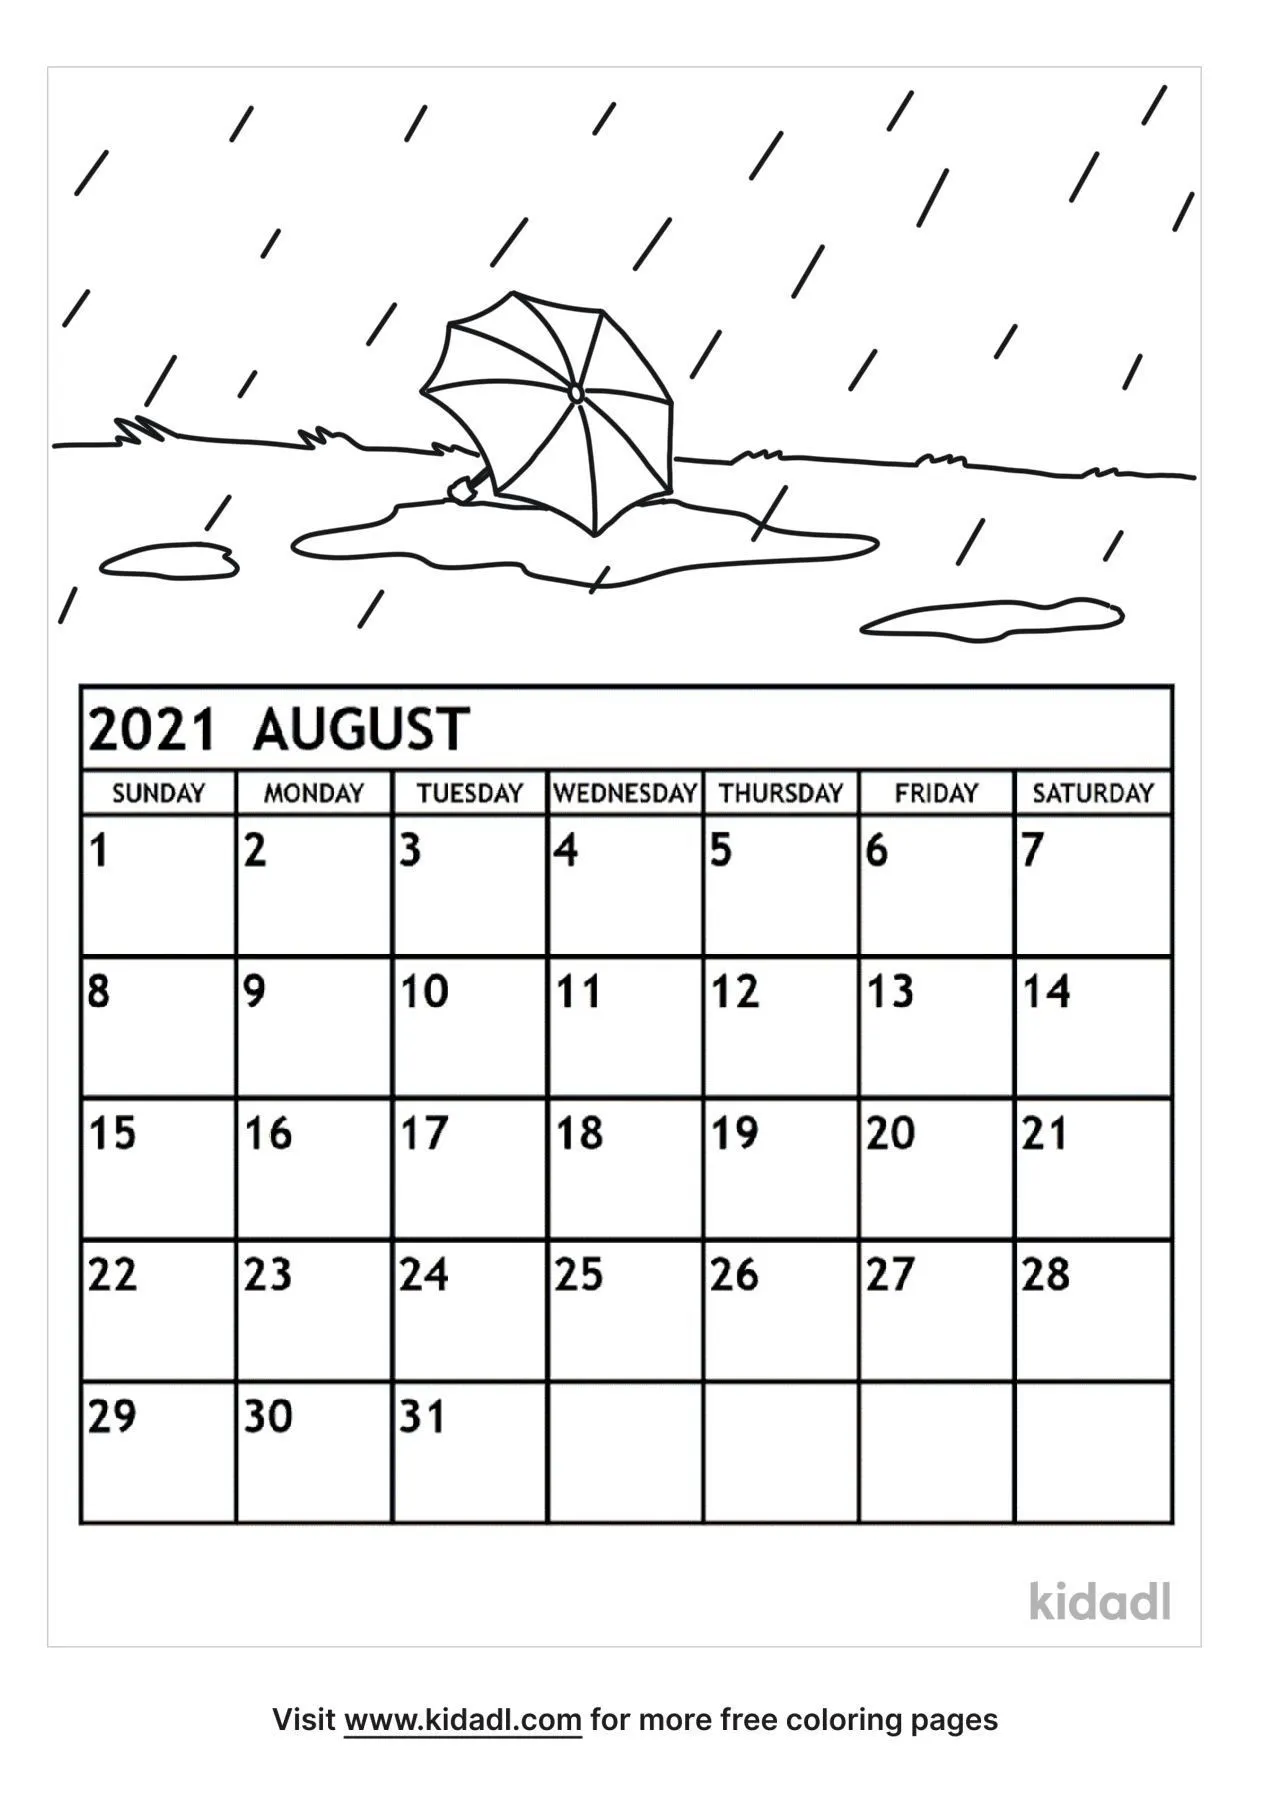 August Calendar Coloring Page